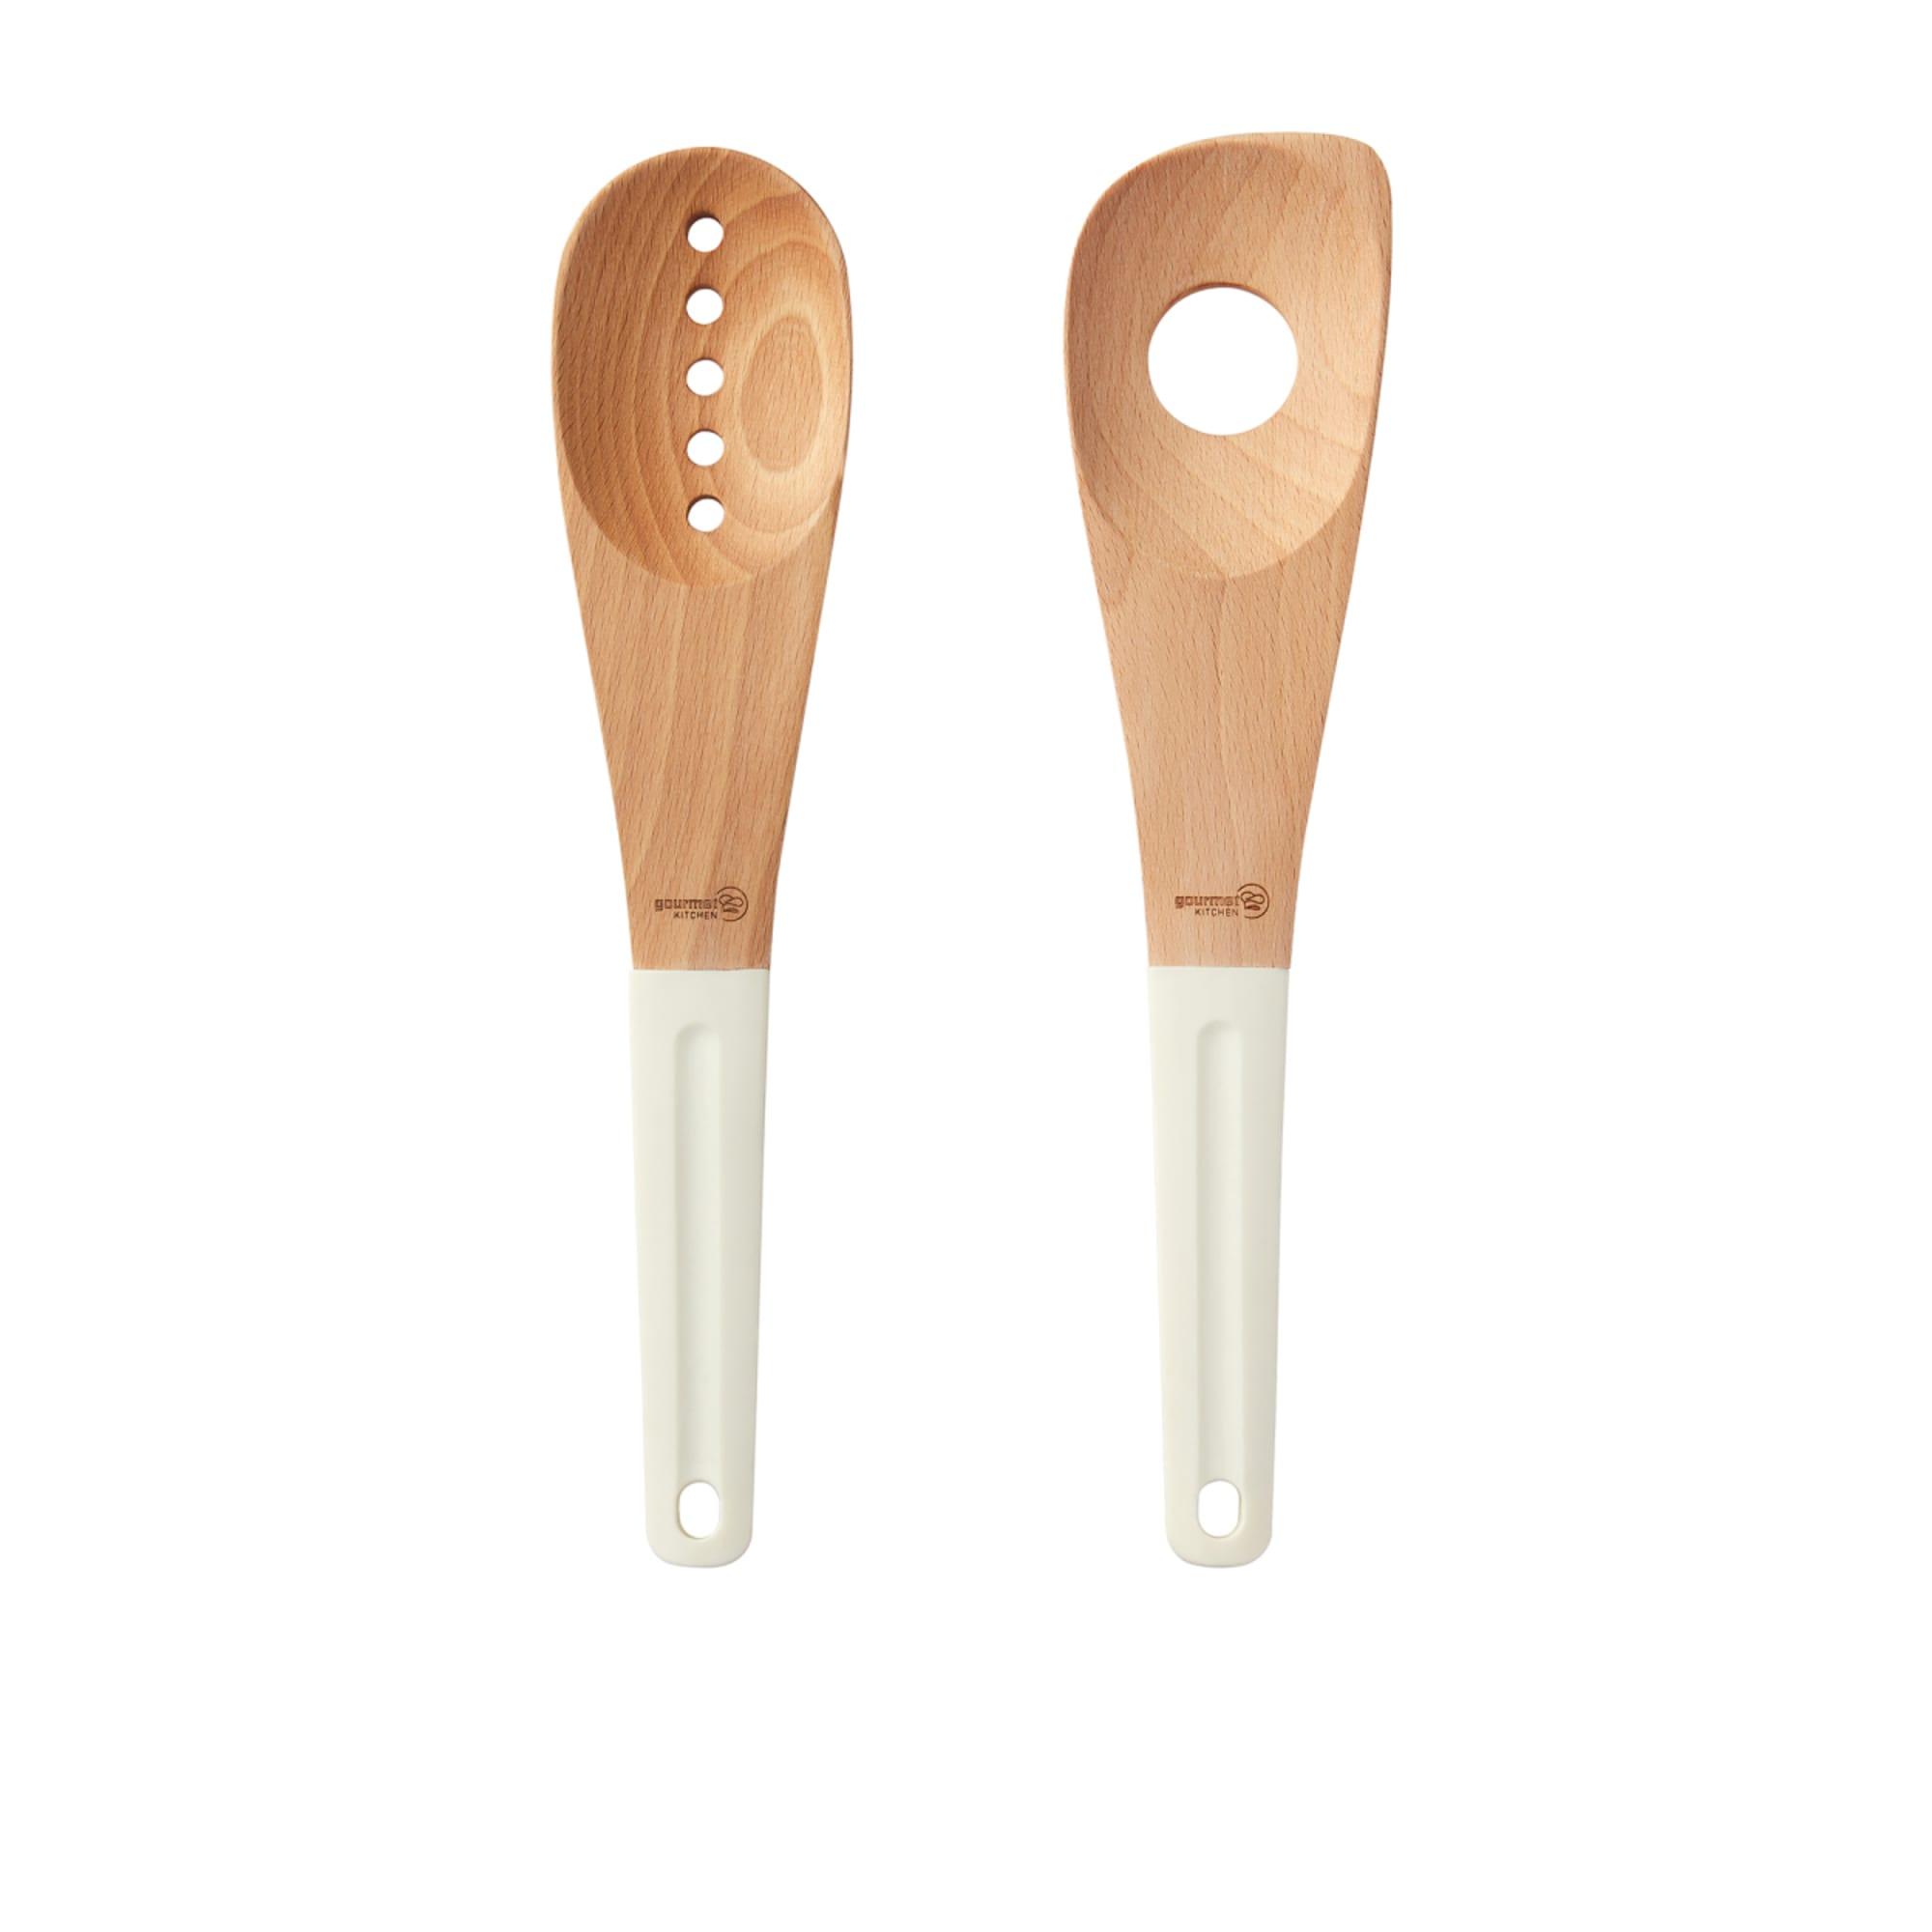 Gourmet Kitchen Modern Beech Wood Spoon Set with Silicone Grip 2pc Image 3